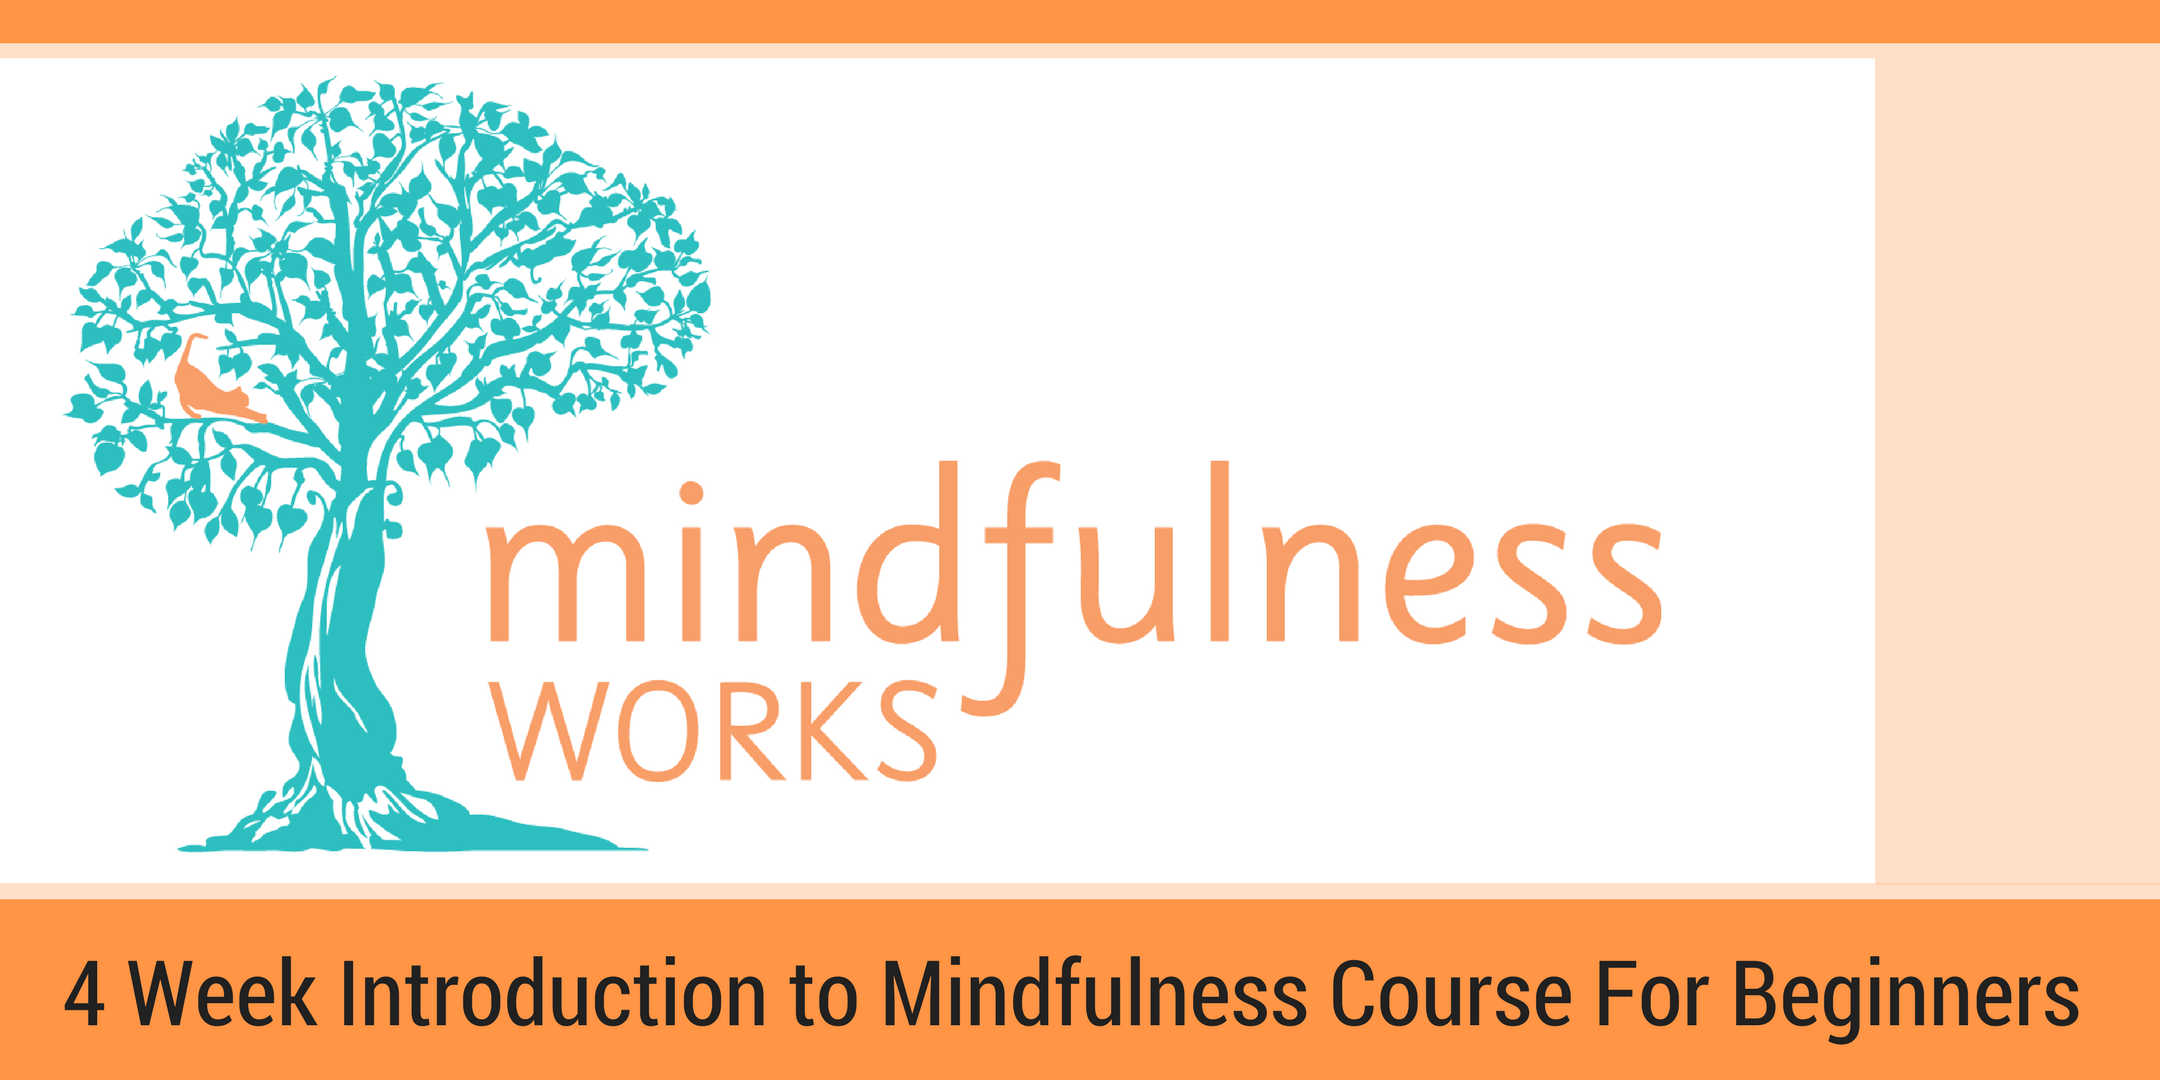 Newcastle (Hamilton) – An Introduction to Mindfulness & Meditation 4 Week Course